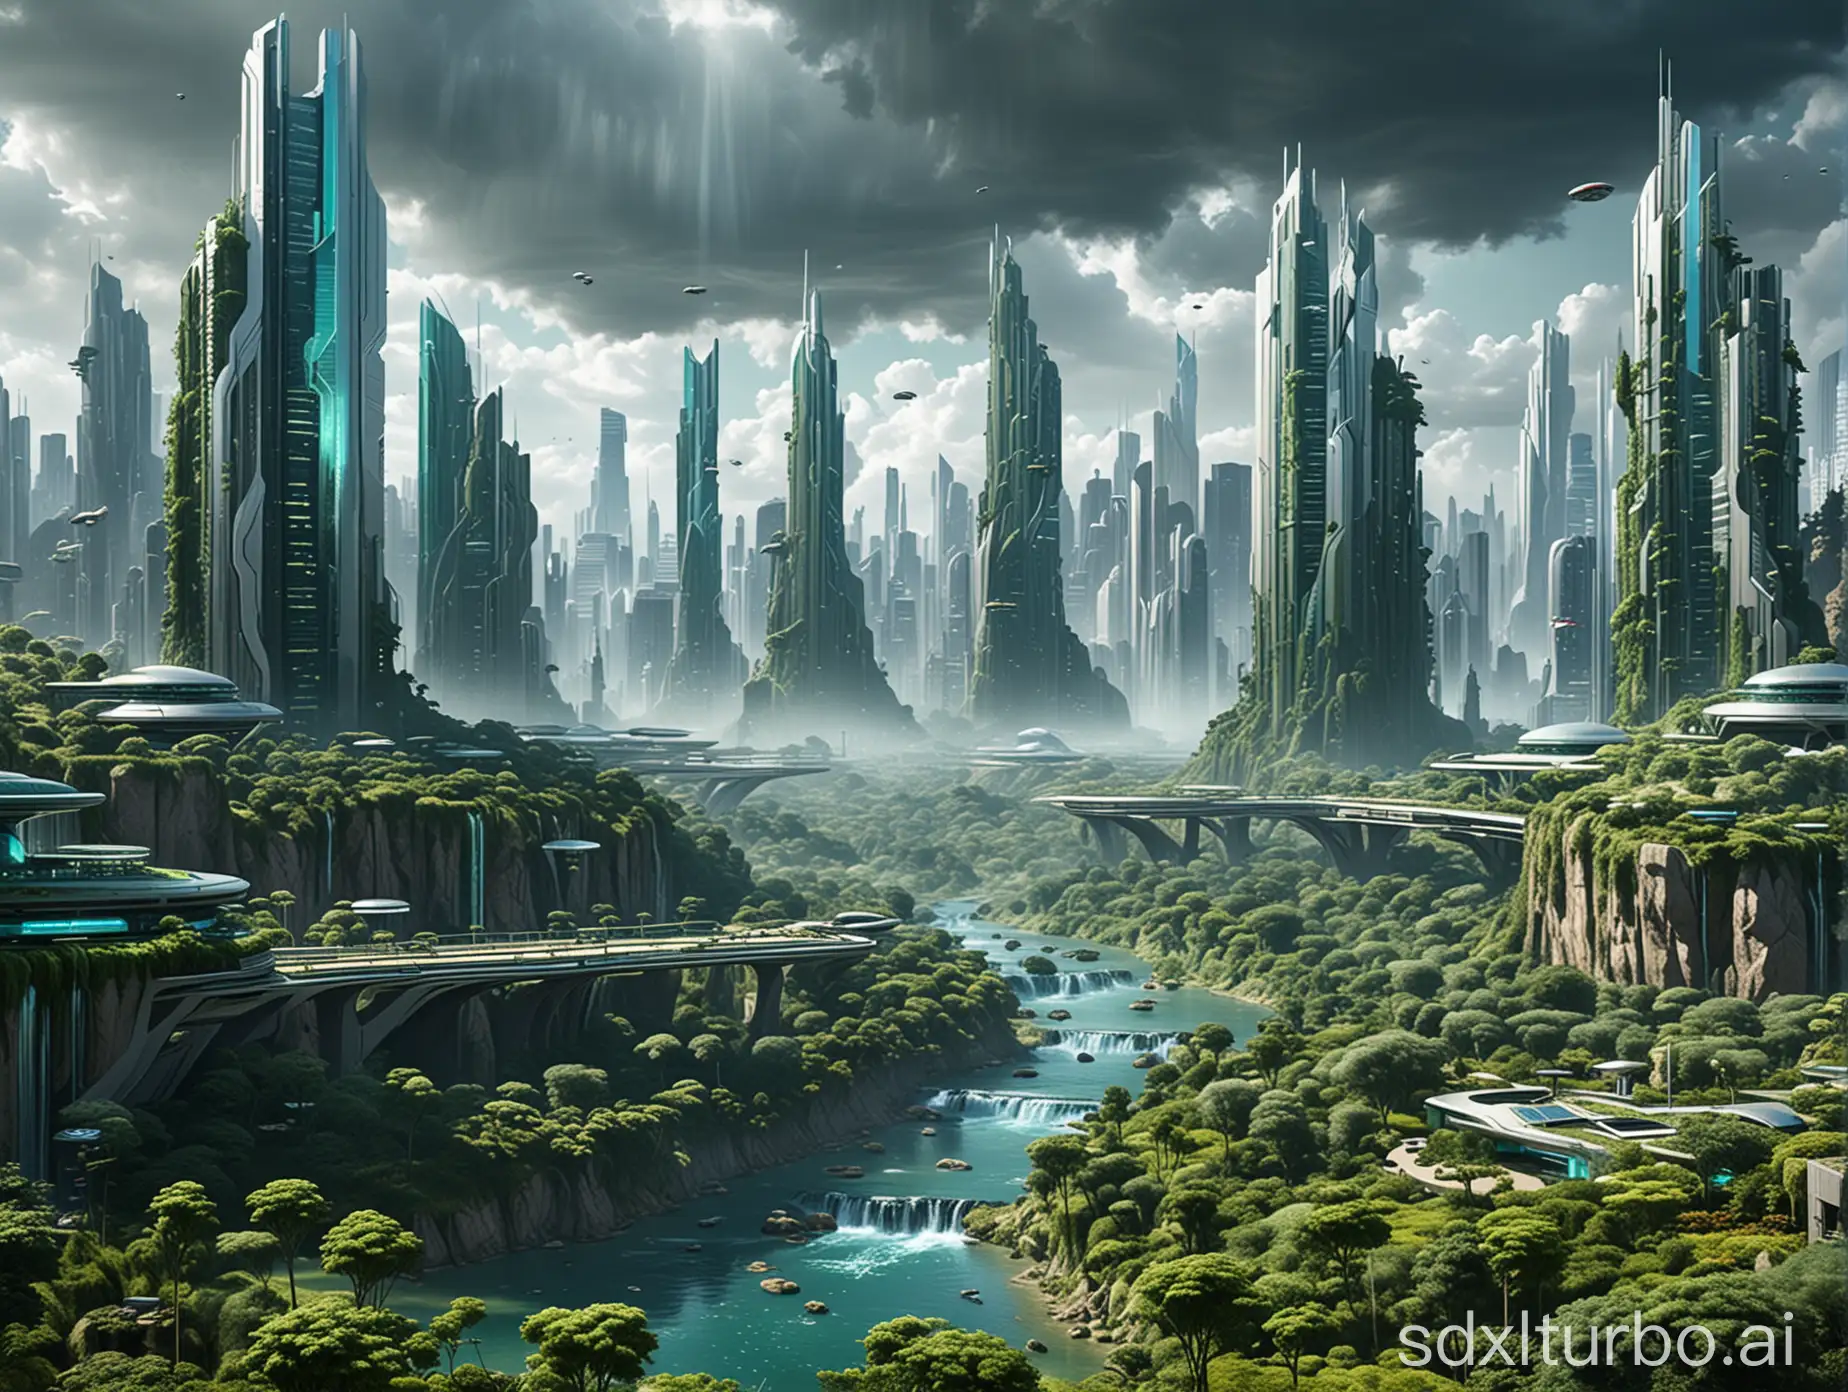 Generate a futuristic sci-fi city with neatly landscaped green belts, where buildings seamlessly blend with nature. The buildings feature small holographic waterfalls cascading down, imbuing a sense of technology and futurism. Clean, tidy, with towering skyscrapers—a futuristic metropolis.